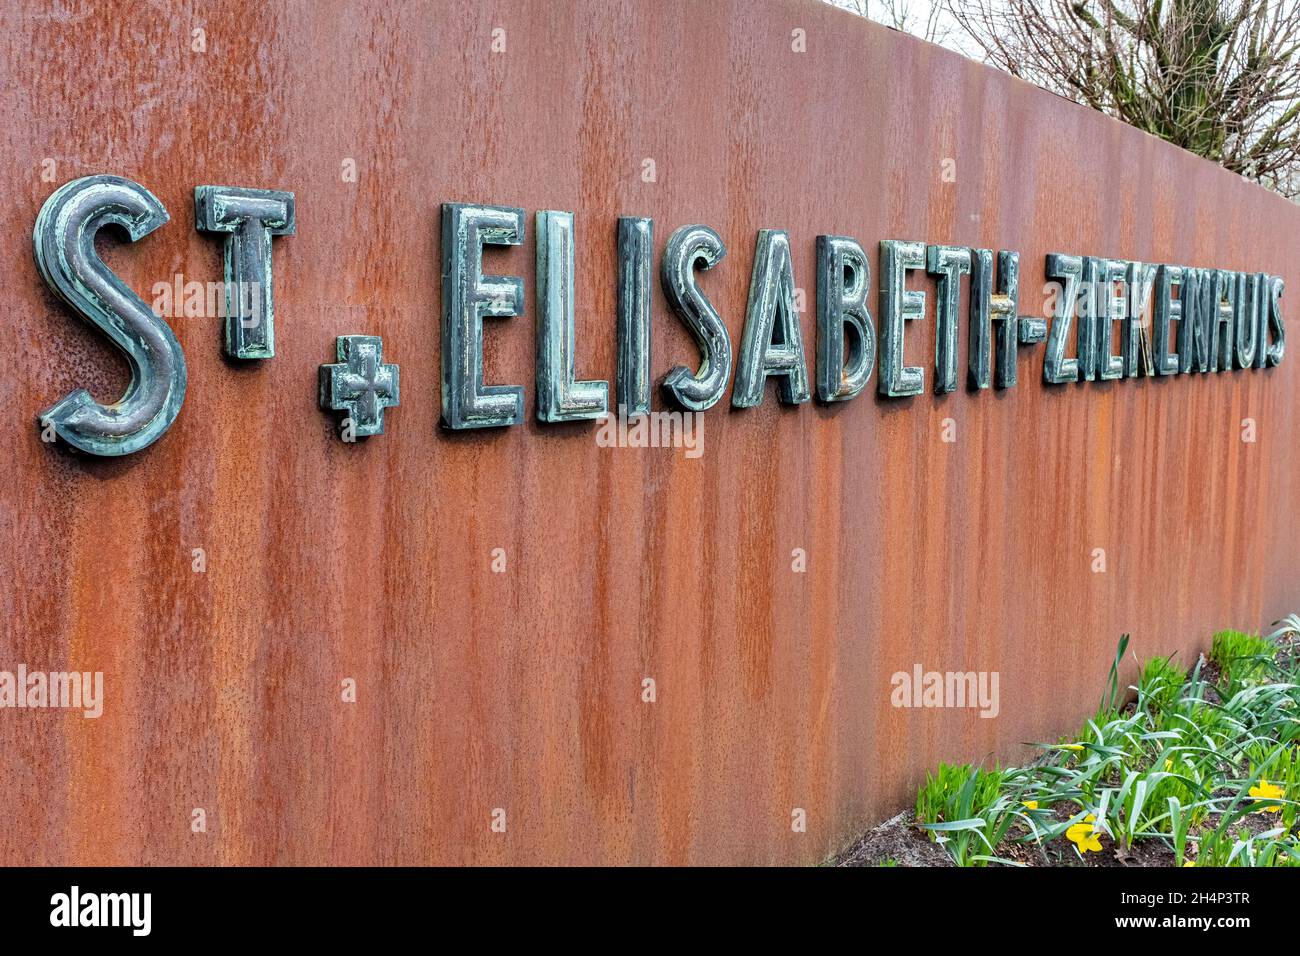 Tilburg, Netherlands. Main entrance of ETZ Elisabeth Hospital, where on wednesday, February 26, 2020 the first Dutch Corona / COVID-19 Patient from Loon op Zand was submitted into quarataine for treatment of the virus. Stock Photo